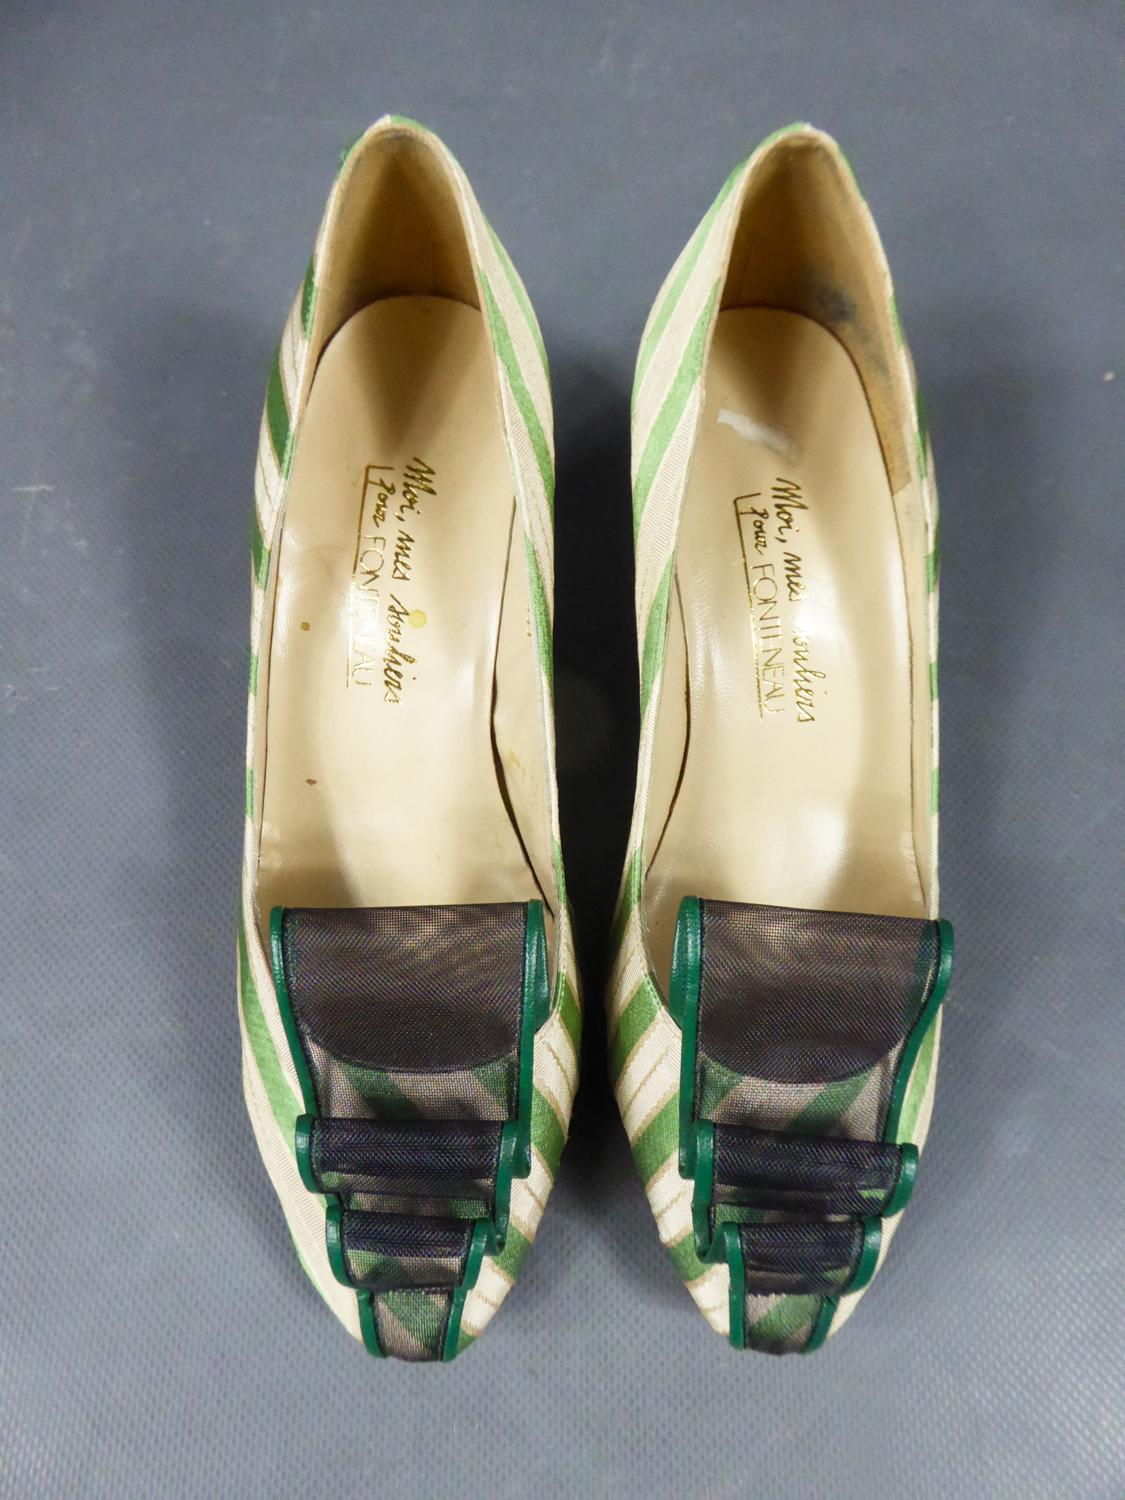 Circa 1960/1970
France

Pretty pairs of heels in striped silk in the shades of cream, green and gold with small black heels. Shaped silk with satin bands and cream faille. Rounded ends embellished with a strip of rigid plastic tulle surronded with